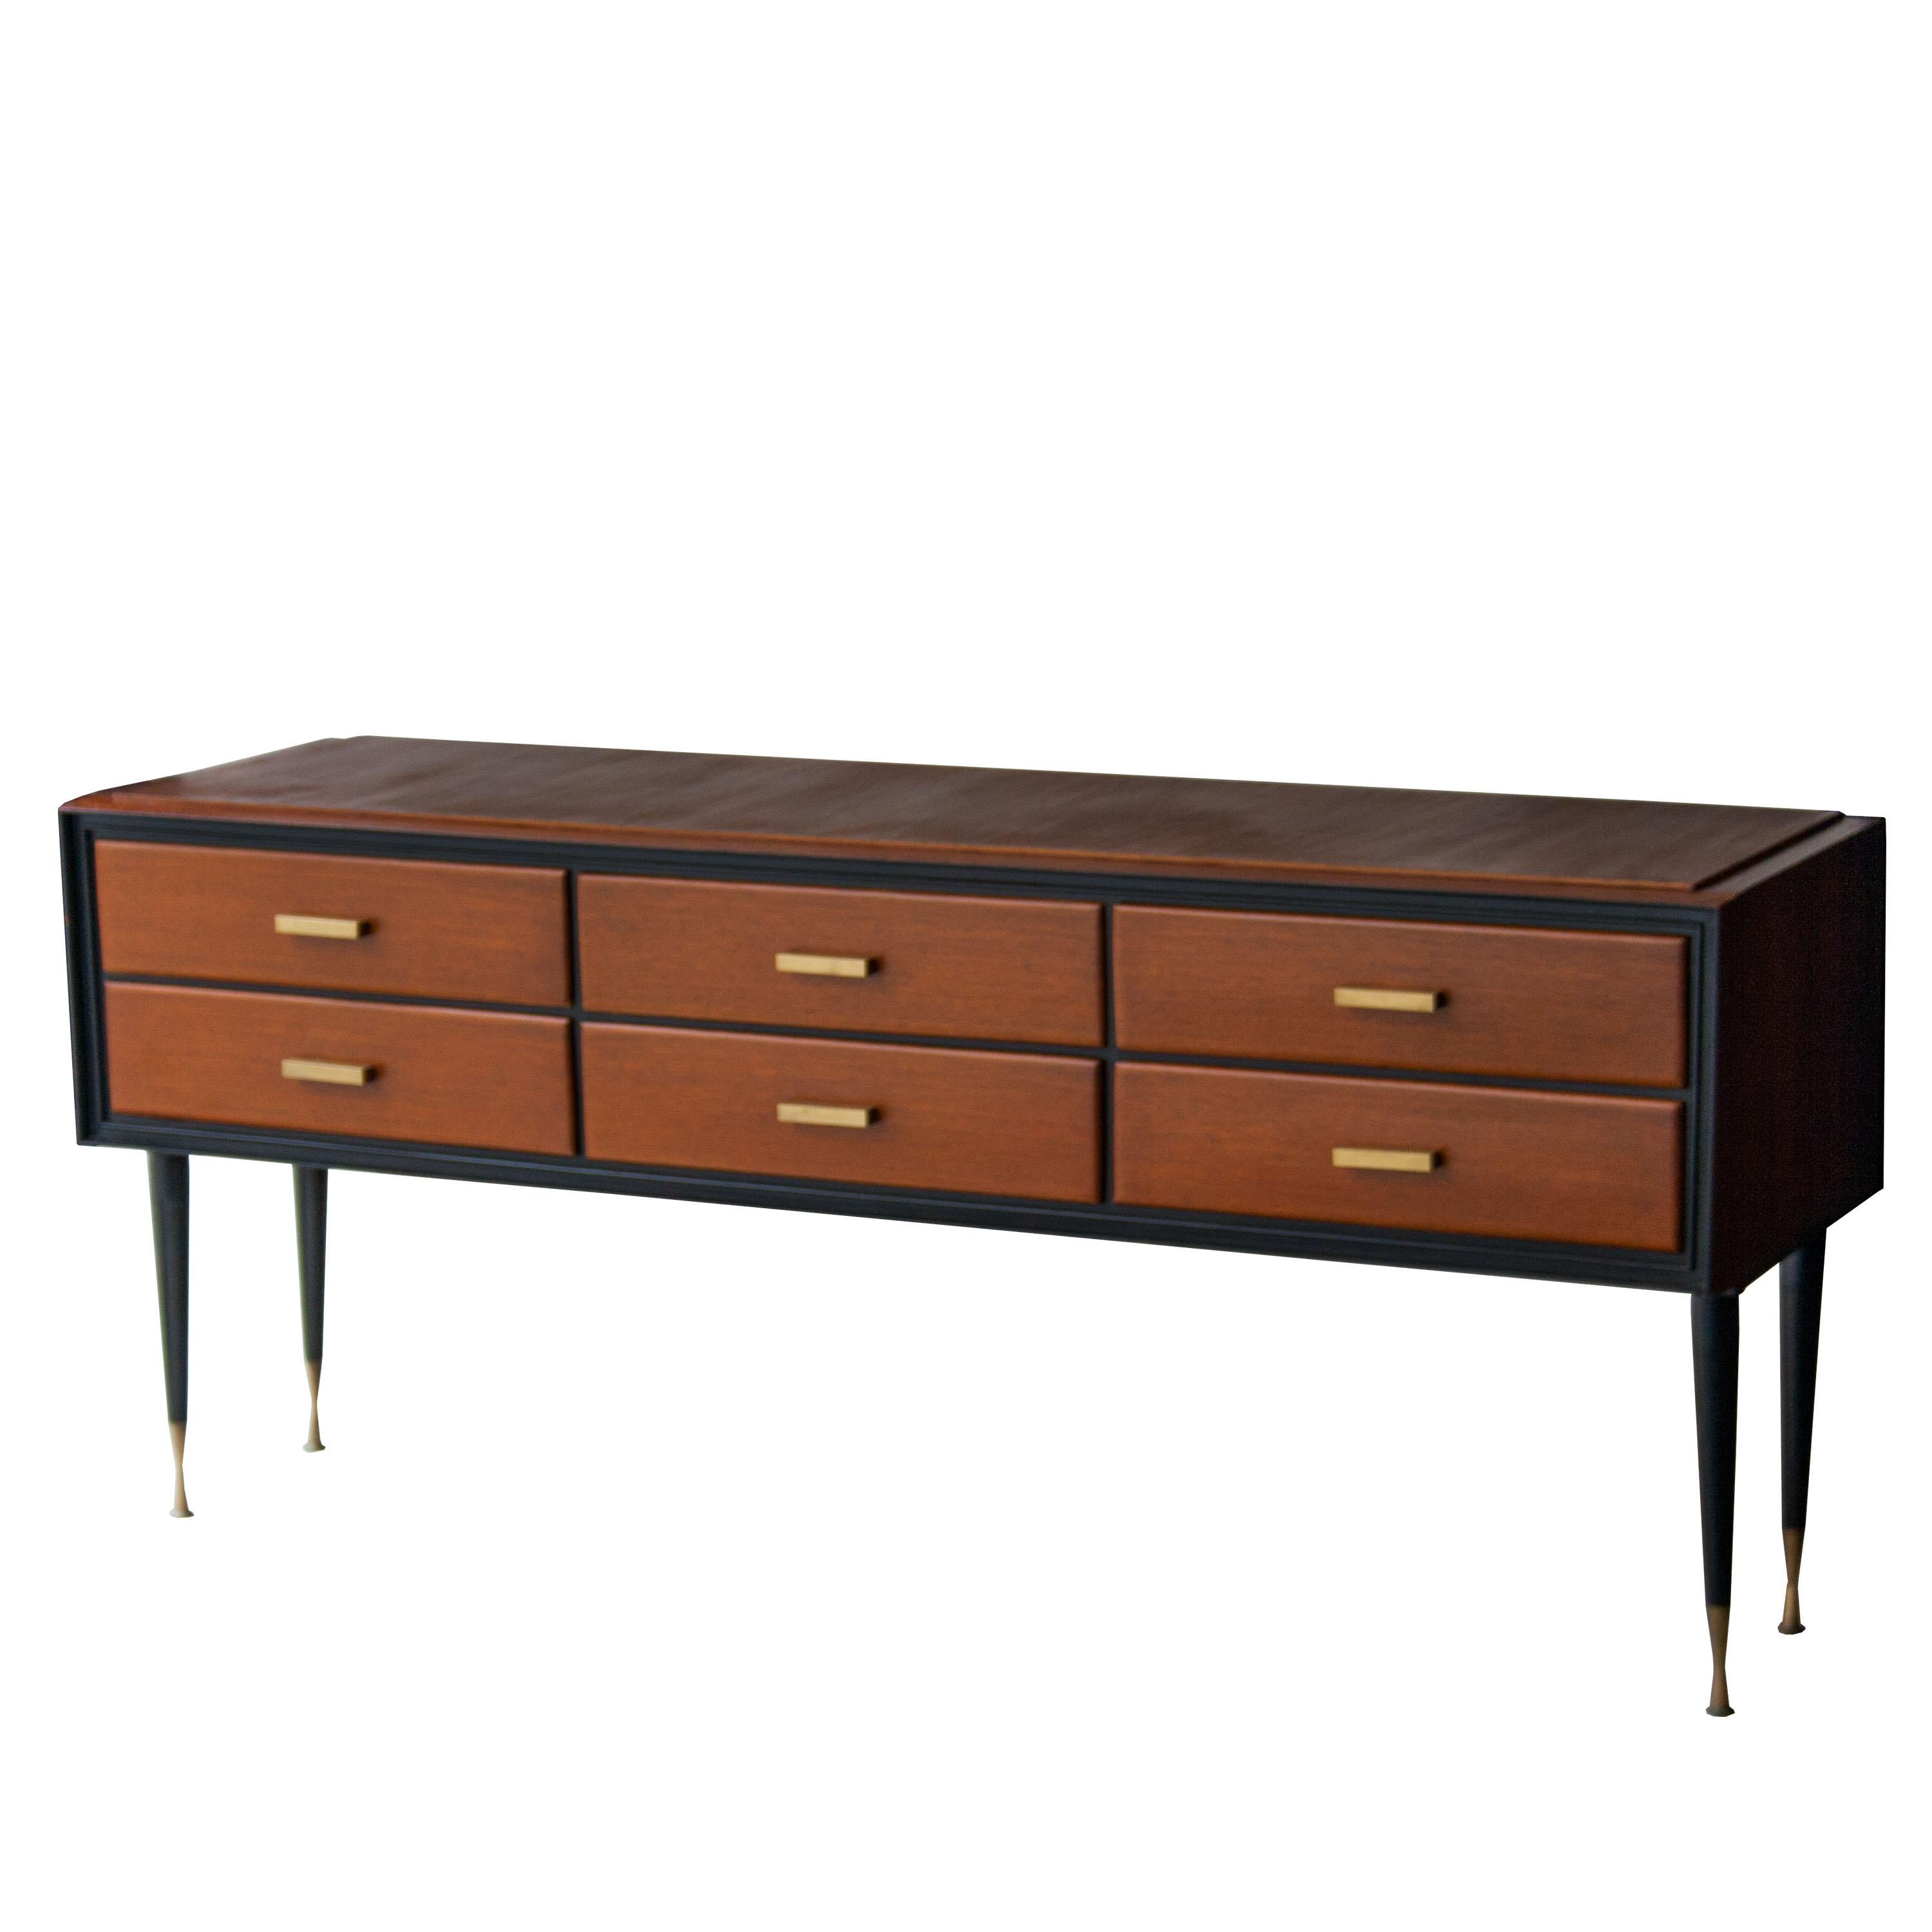 Midcentury Italian sideboard with six drawers. Made in solid wood, with black lacquered legs and details. Pulls and legs finished in brass details.
 